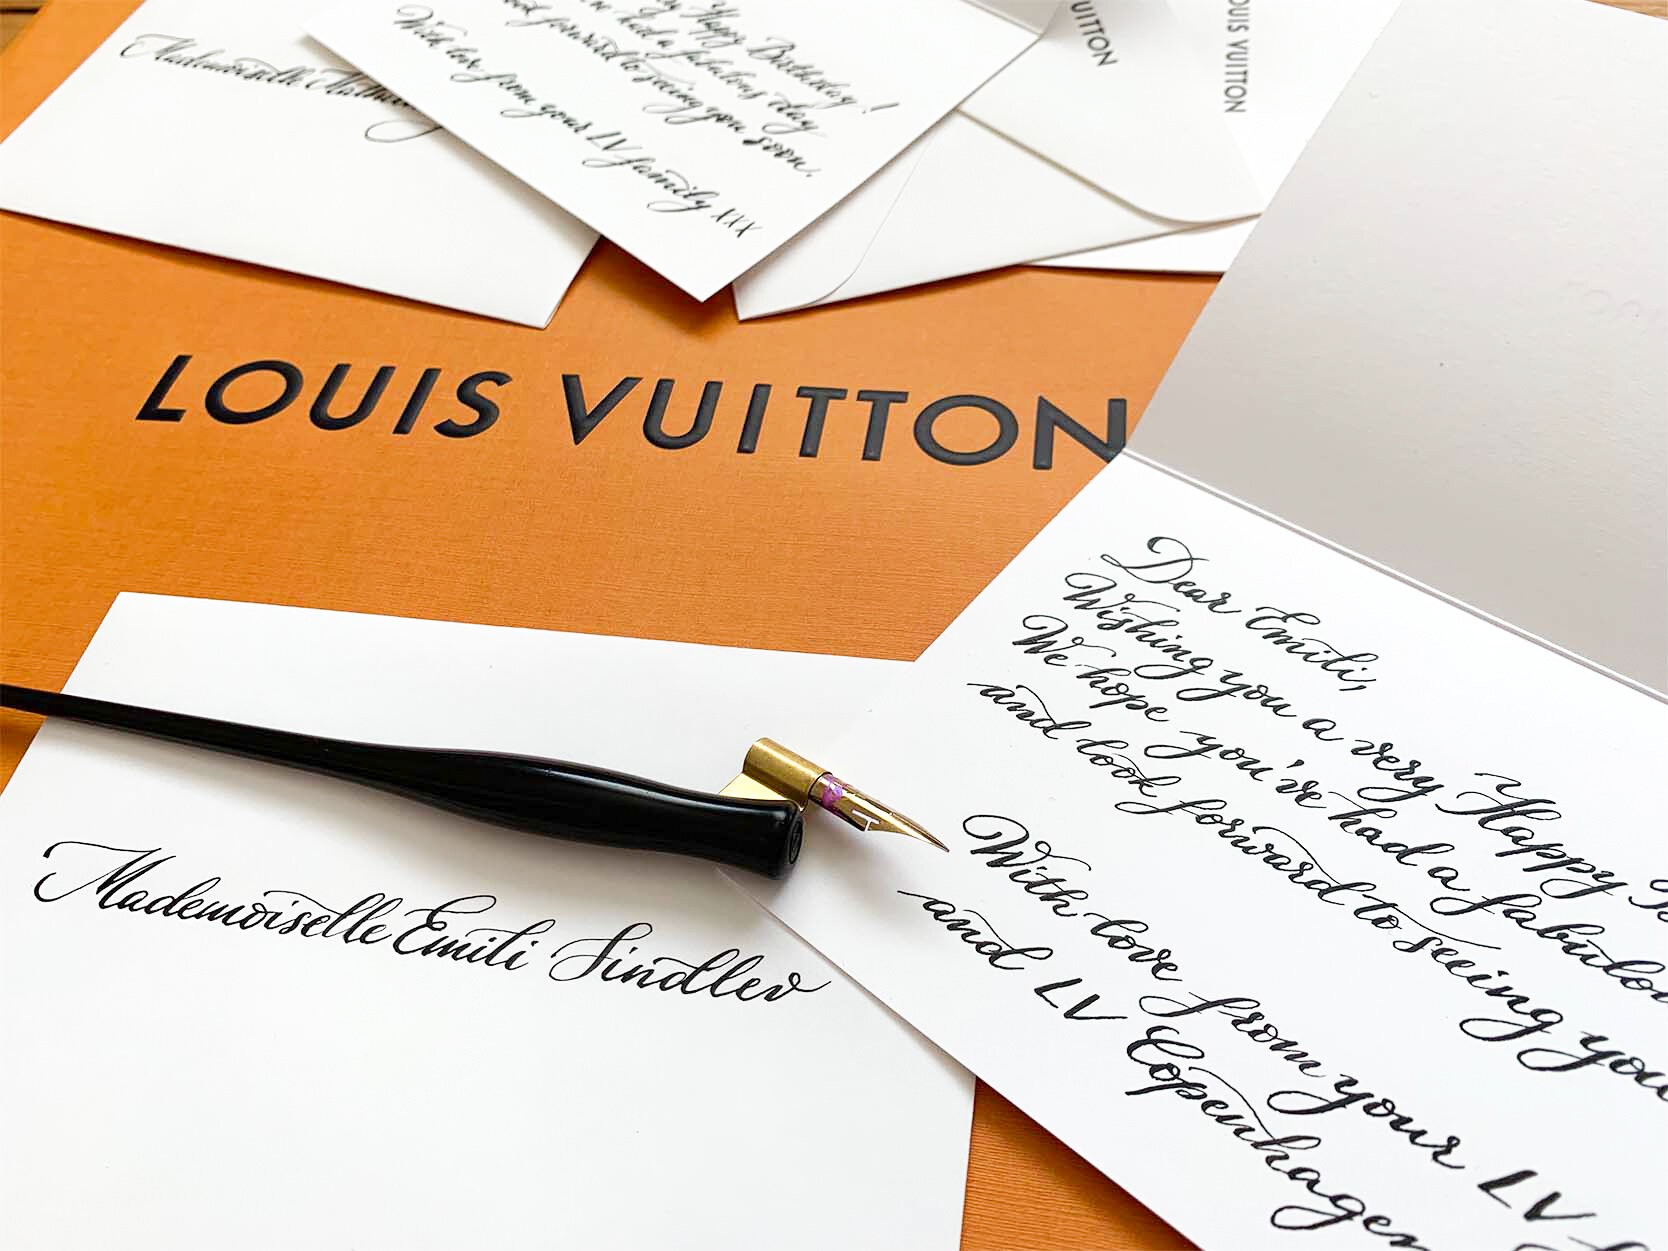 Louis Vuitton Greeting Card Greeting Cards & Invitations